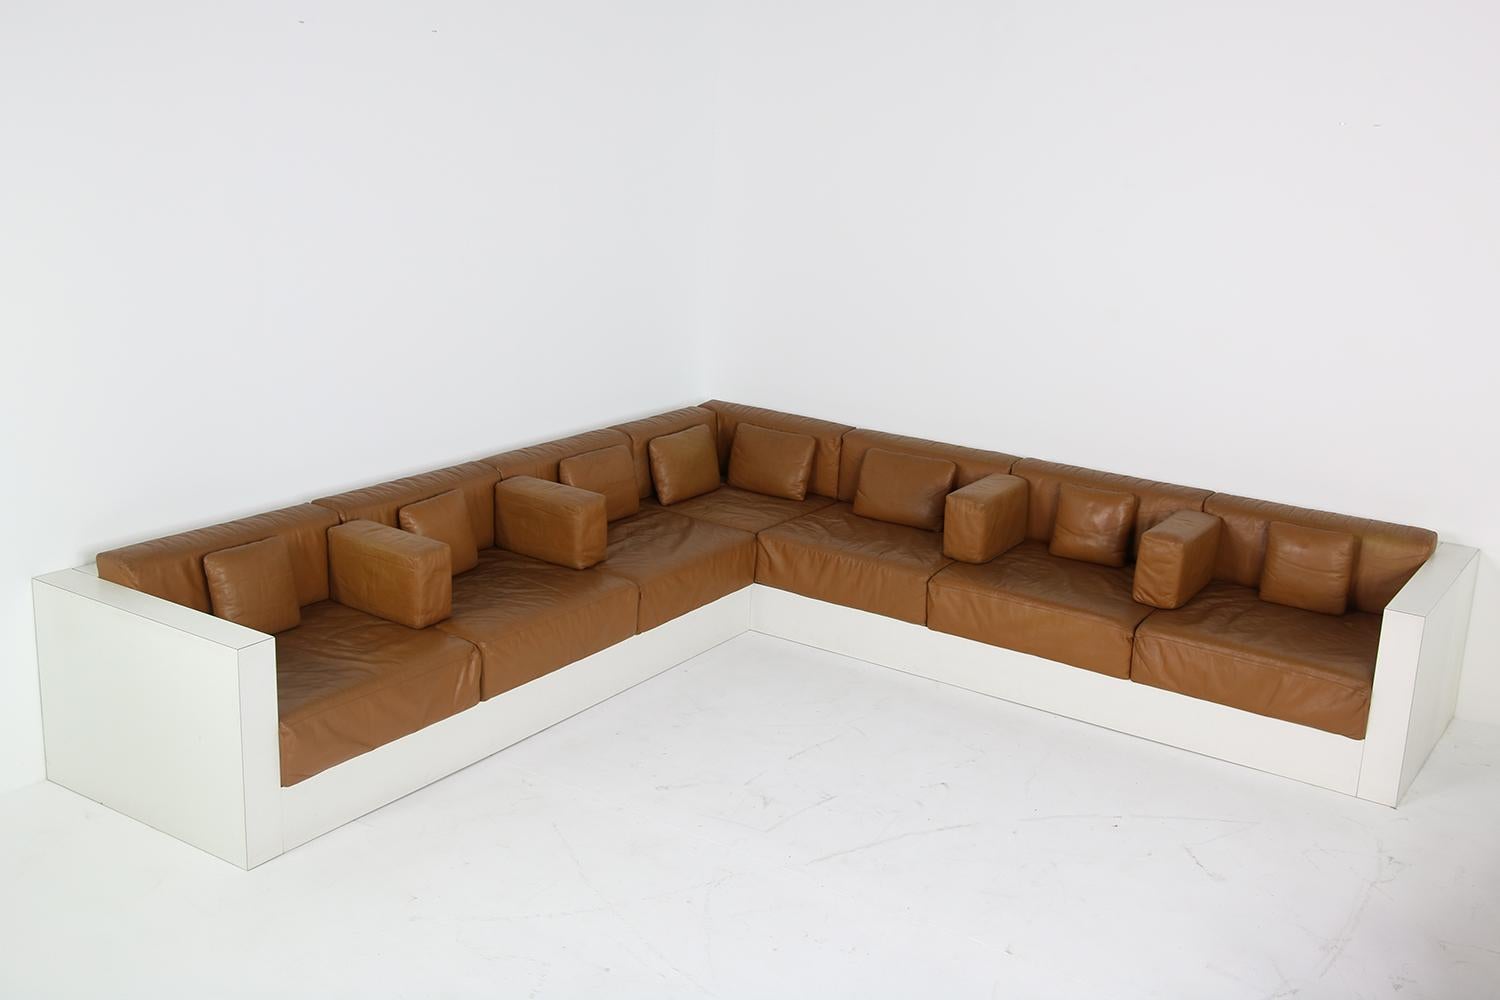 Unique & Large 1960s Landscape Sofa & Chairs Brown Leather Made to Order 1969 In Good Condition For Sale In Hamminkeln, DE